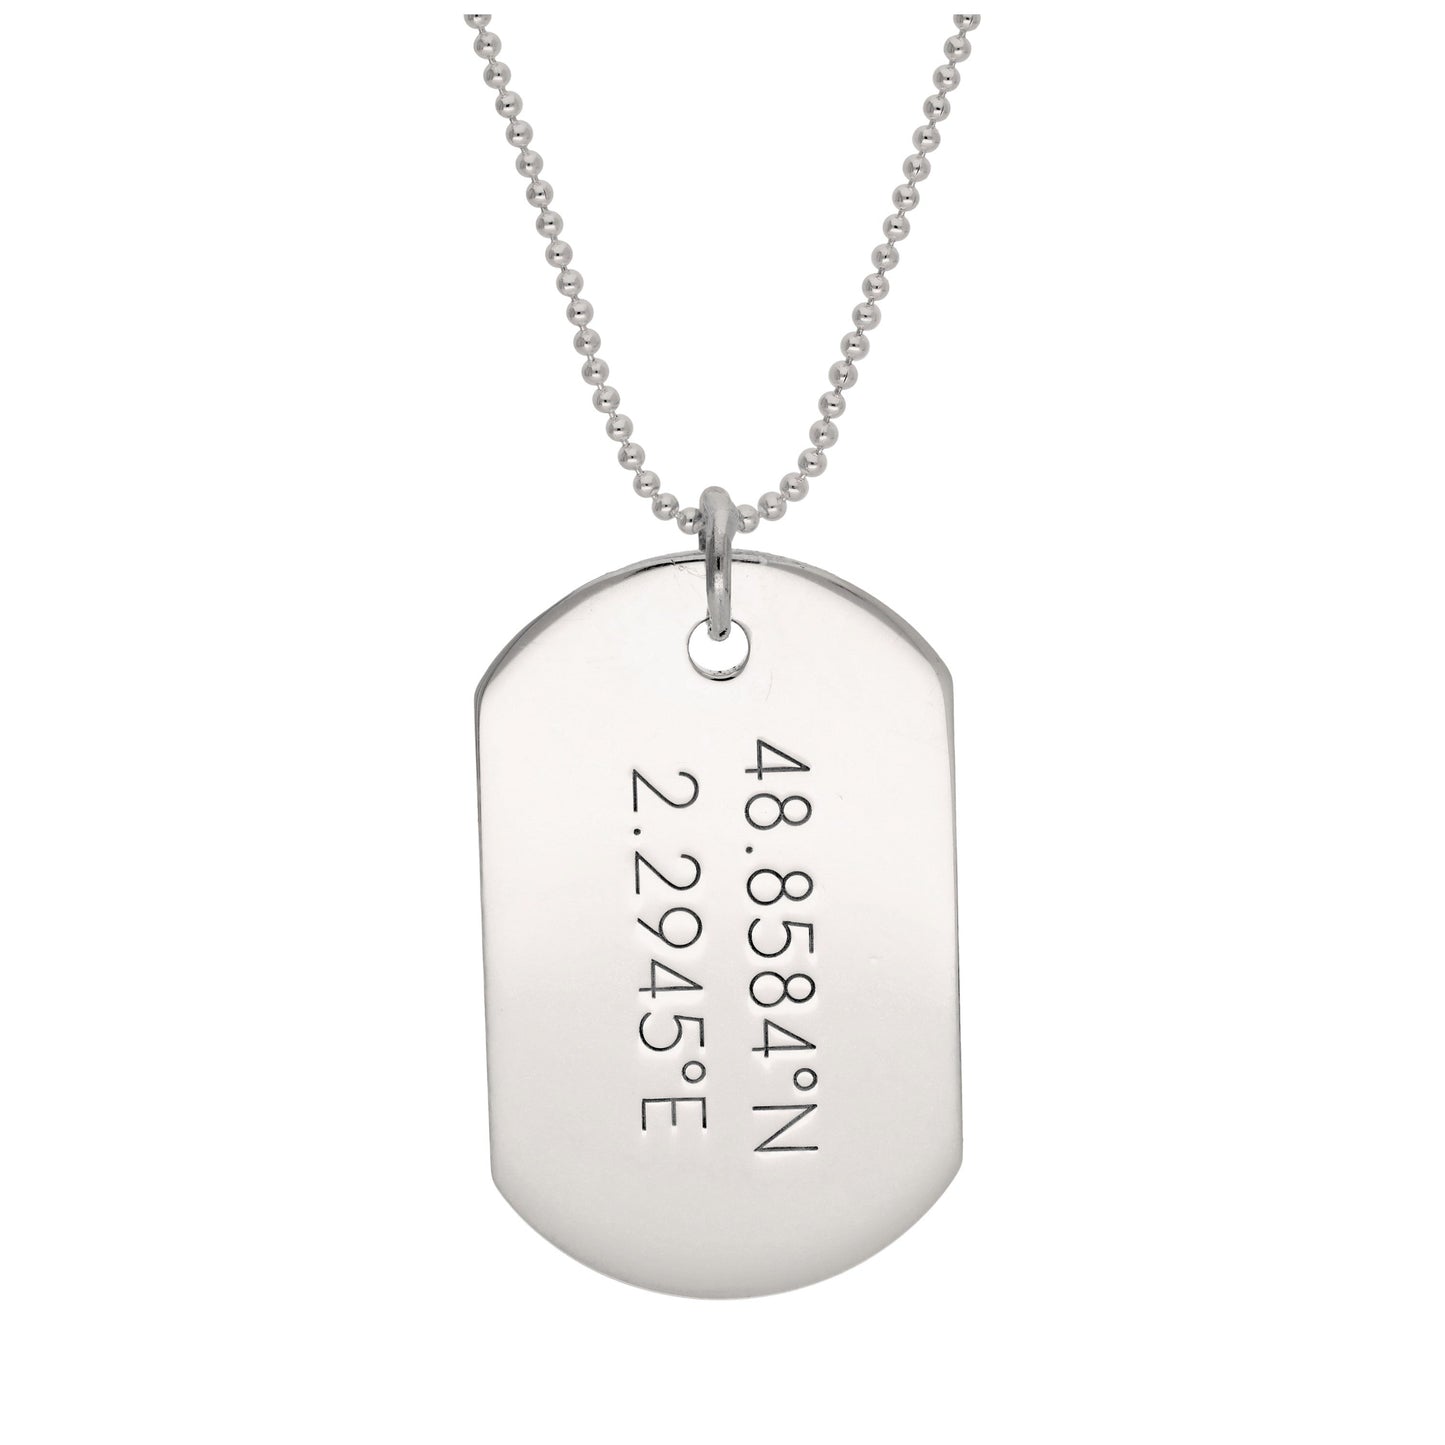 Sterling Silver Engravable Large Dog Tag Pendant Necklace 14 - 22 Inches